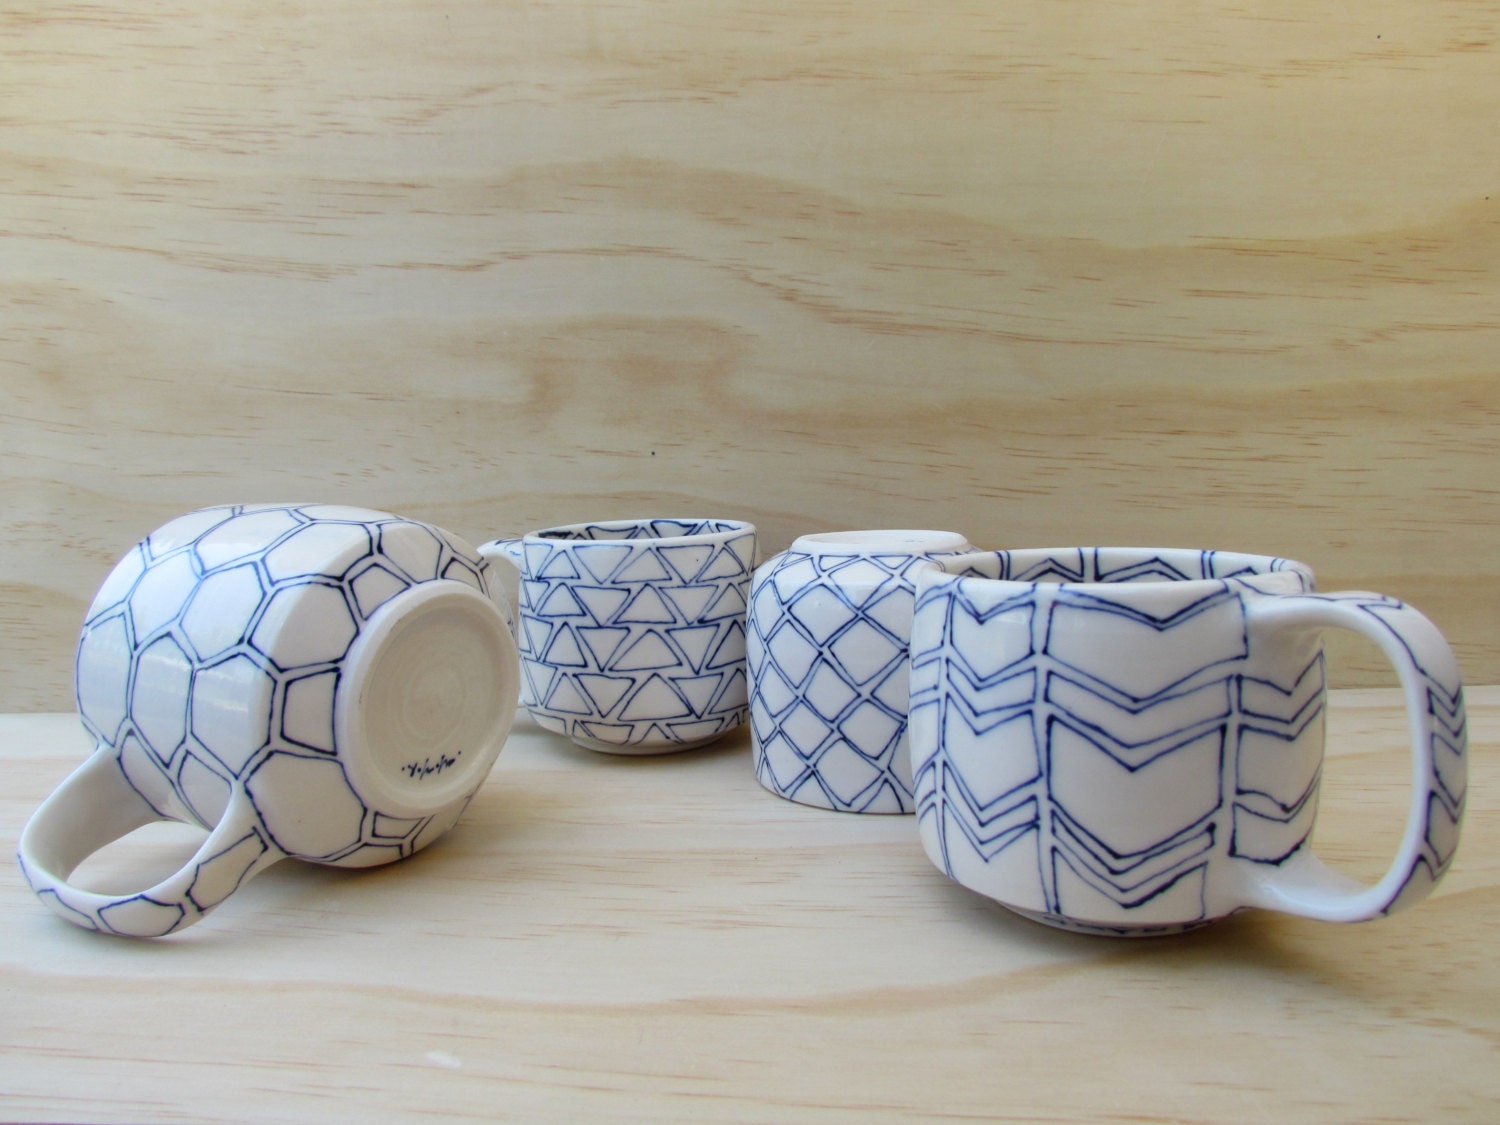 Set of Four Tea or Coffee Mugs. Shapes in blue and white or black and white. Geometric design. Modern porcelain mugs. MADE TO ORDER.